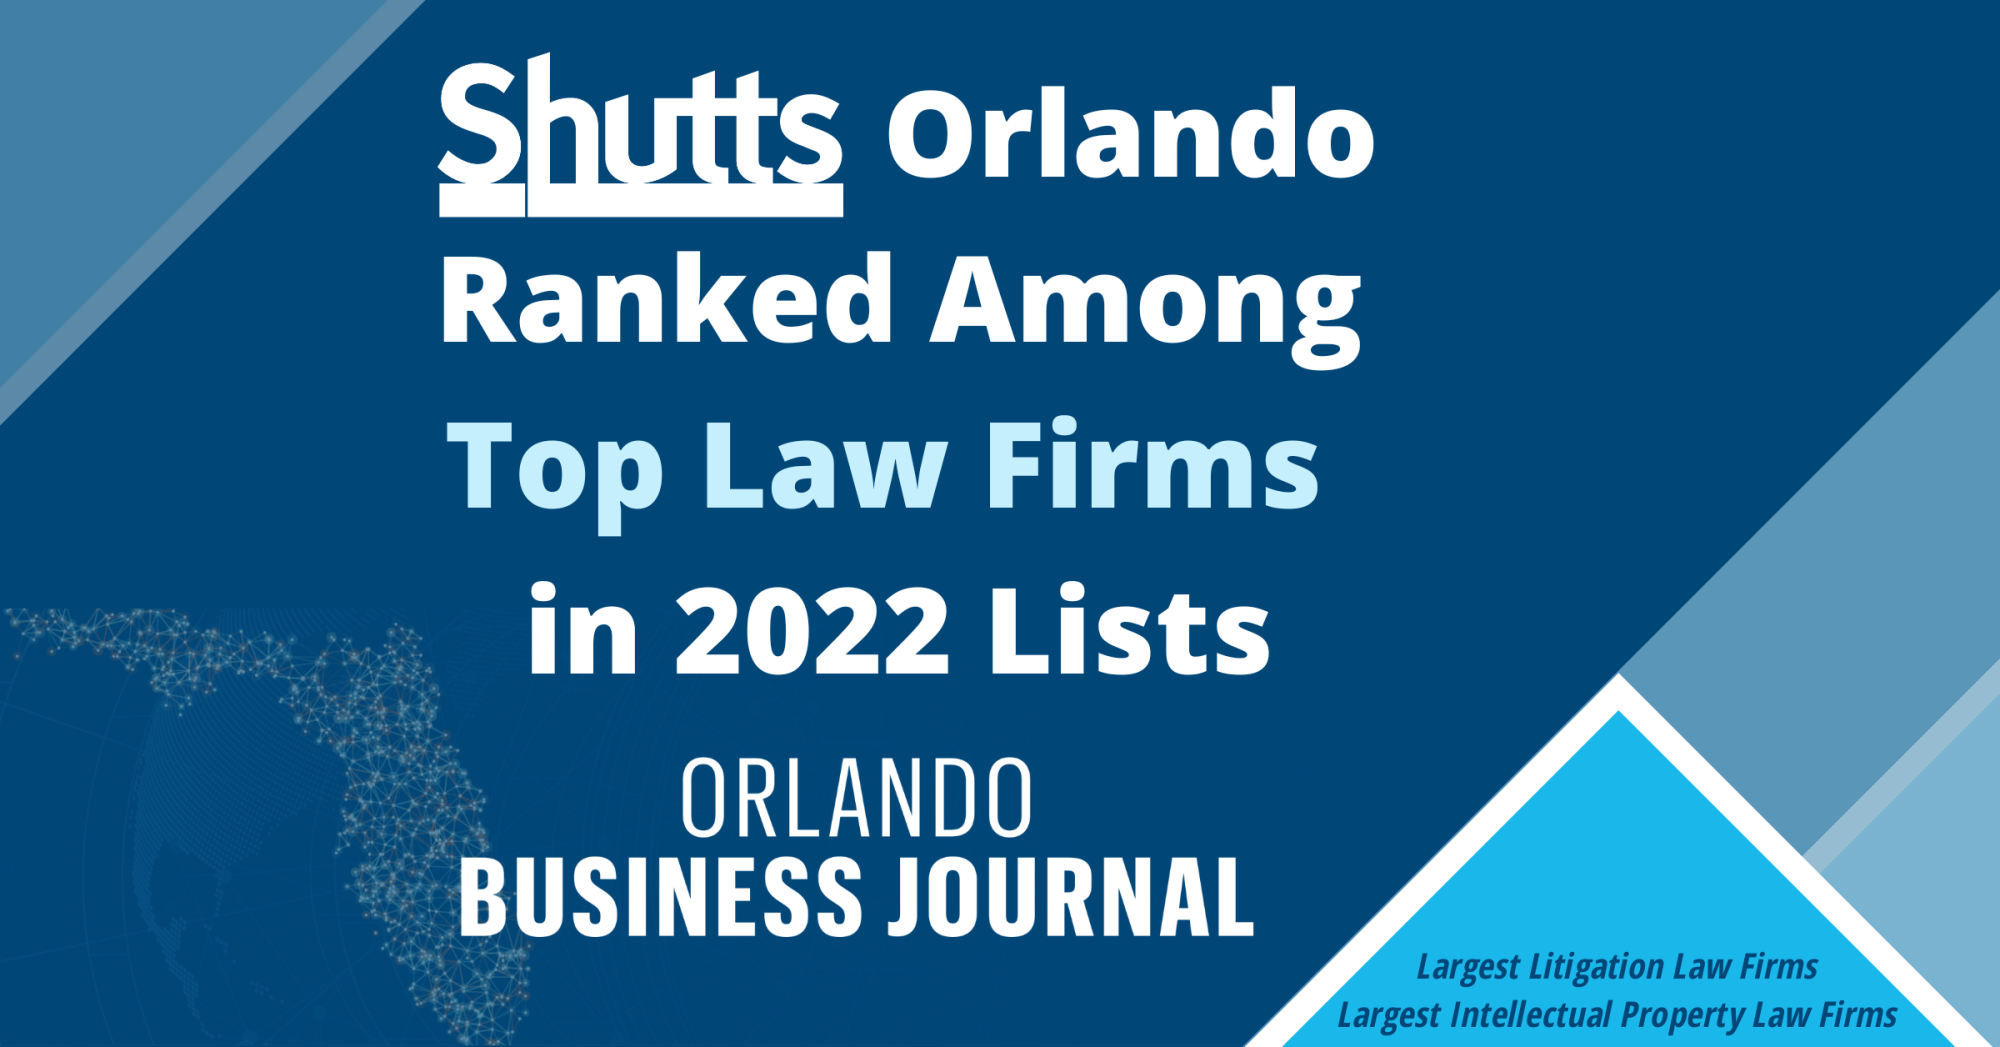 Shutts Orlando Ranked Among Top Law Firms in 2022 OBJ Lists